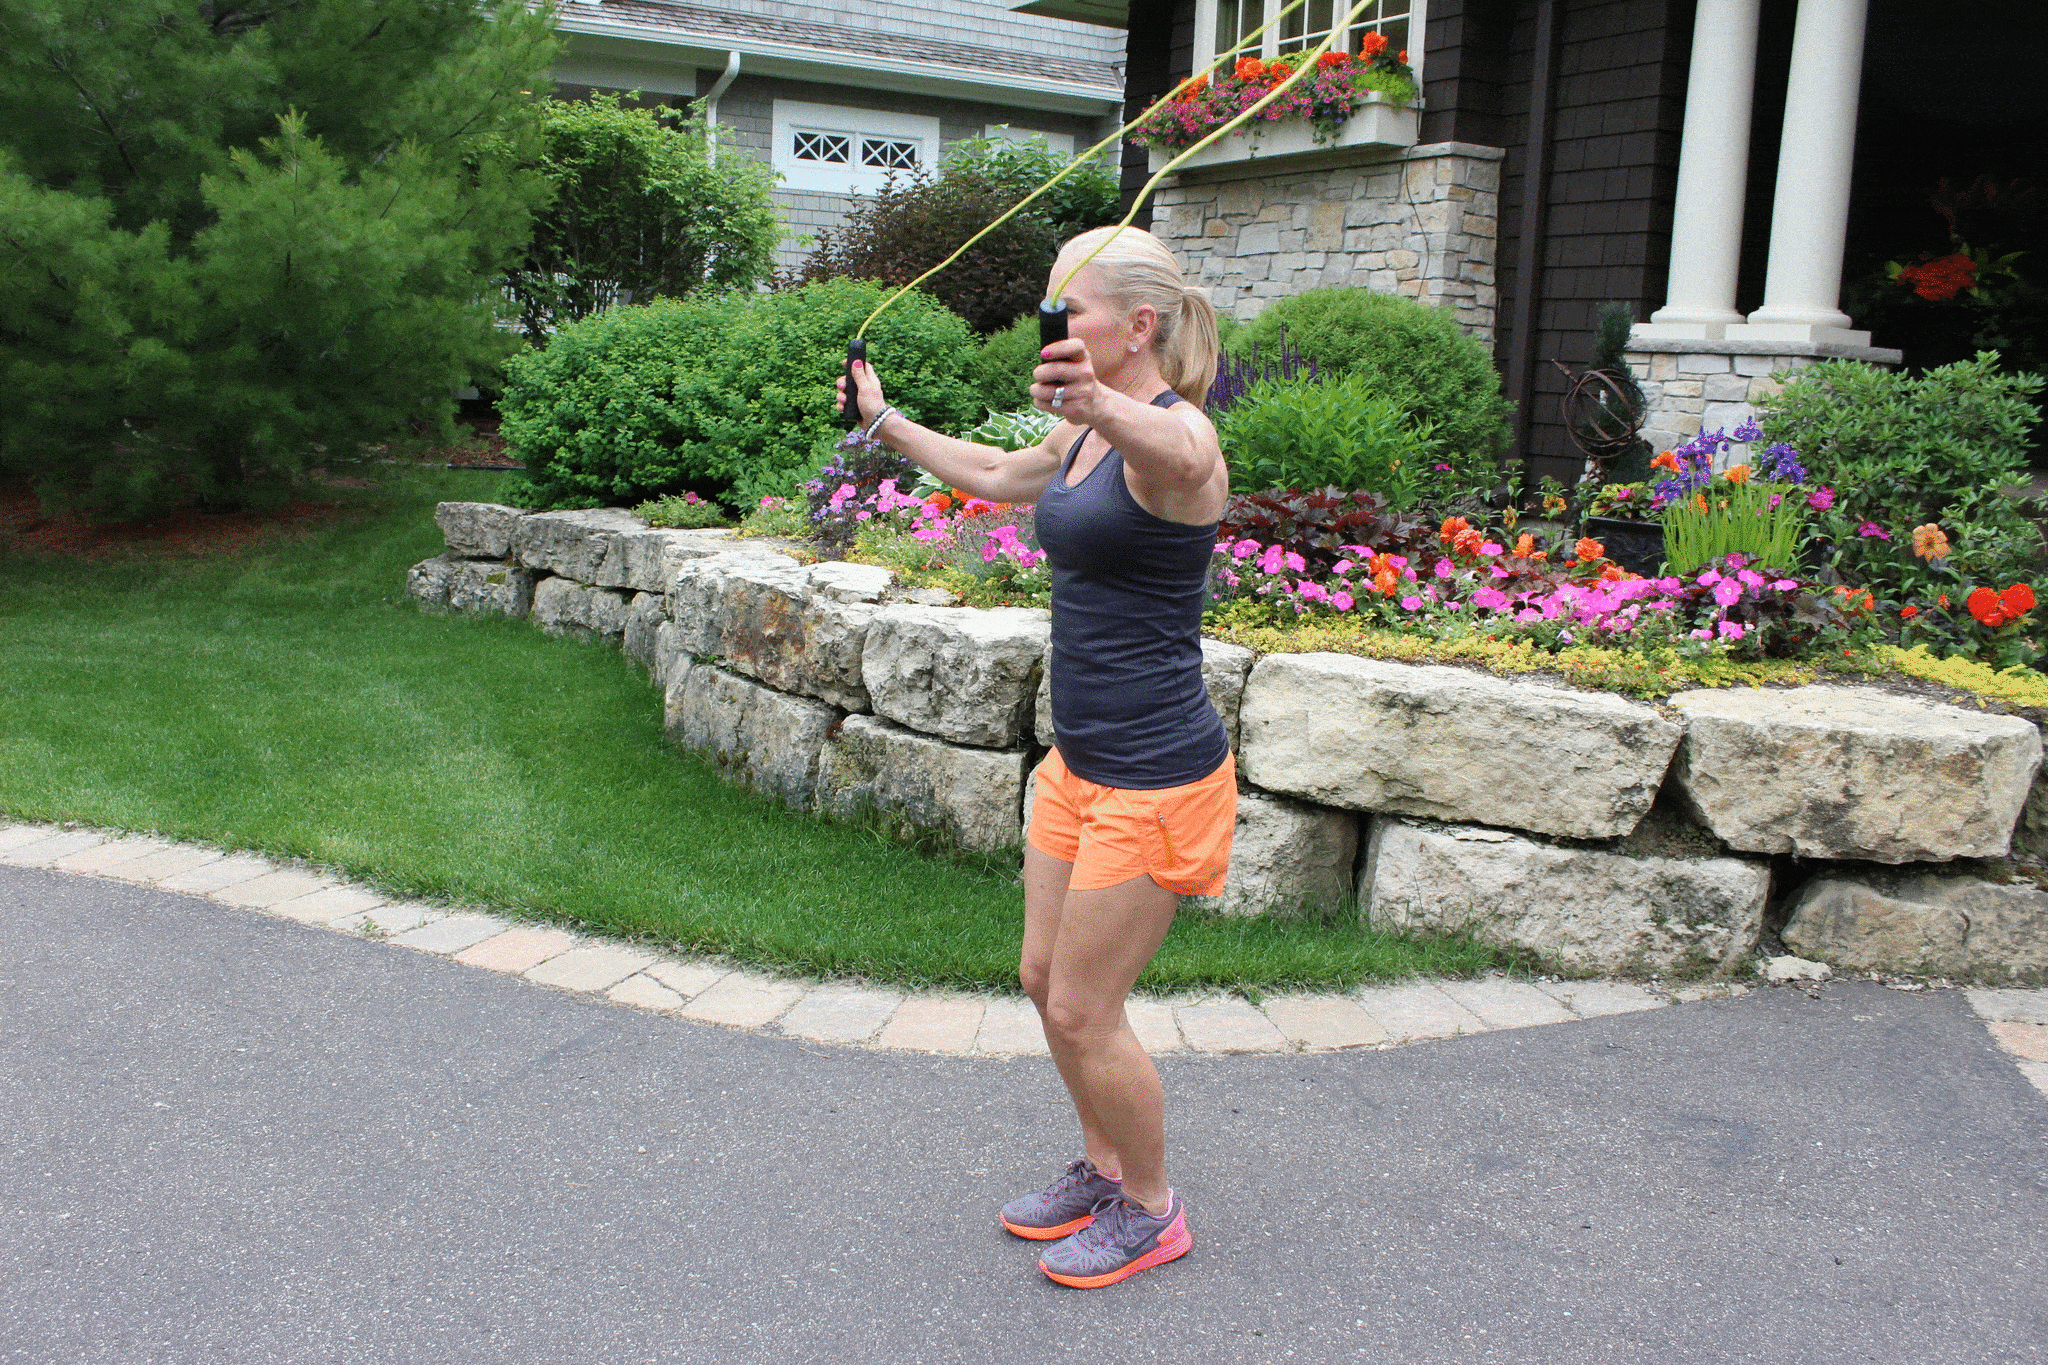 Hit the driveway for a fun and free sweaty workout!